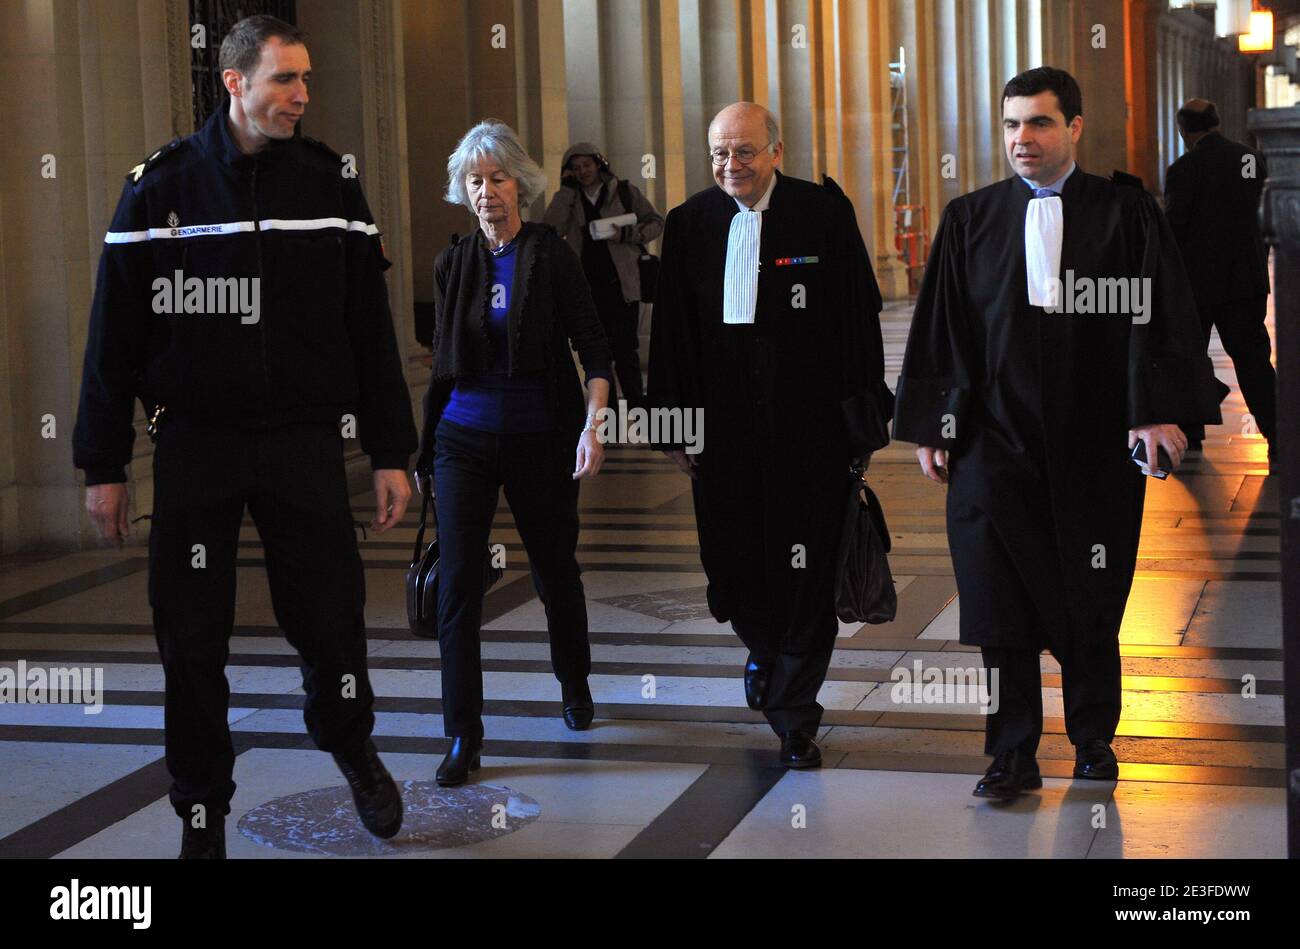 Dominique Erignac, widow of former French prefect Claude Erignac, arrives with her lawyer Philippe Lemaire at the Paris courthouse to attend the Yvan Colonna Trial, in Paris, France, on March 6, 2009. Photo by Mousse/ABACAPRESS.COM Stock Photo